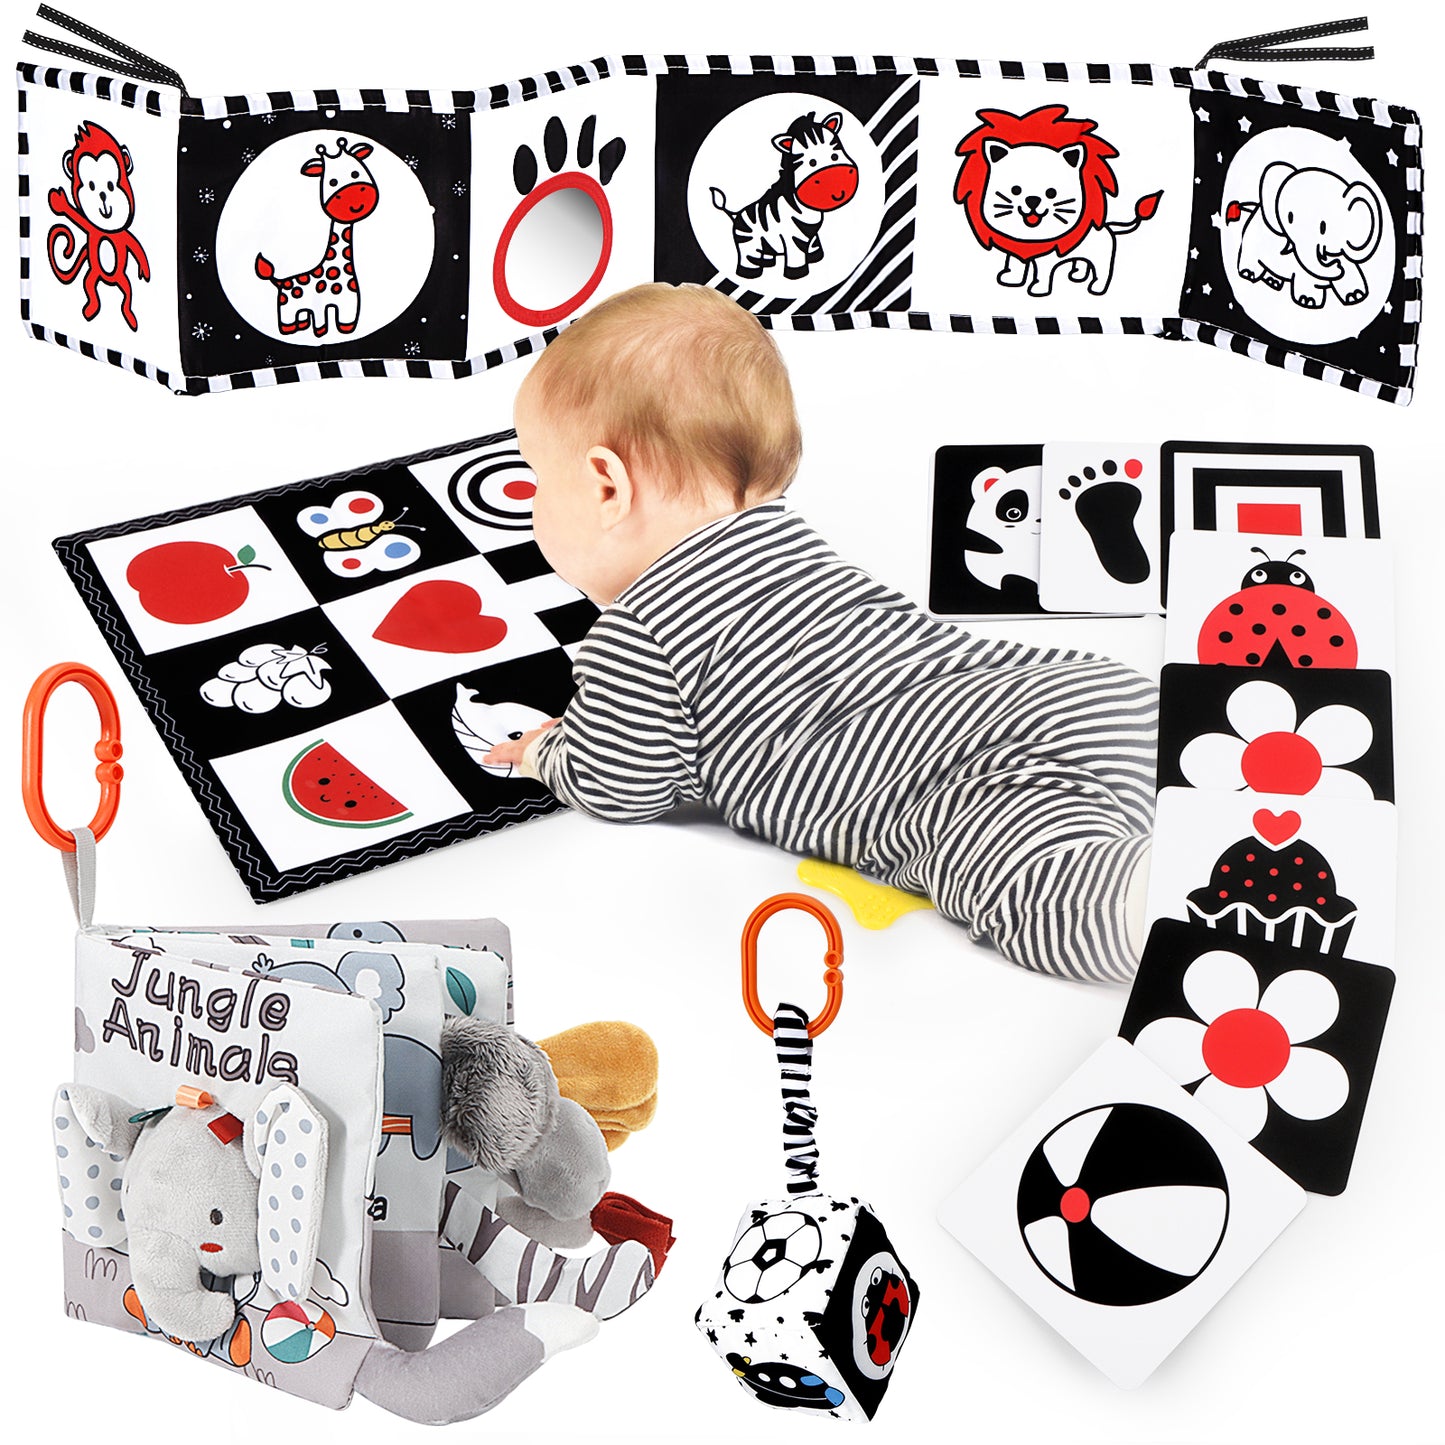 Duewry KaPing Black and White Baby Toys 0-3 Months, Baby Sensory Toys, High  Contrast Baby Cards, Soft Book for Infant Toddler Newborn, Tummy Time Toys